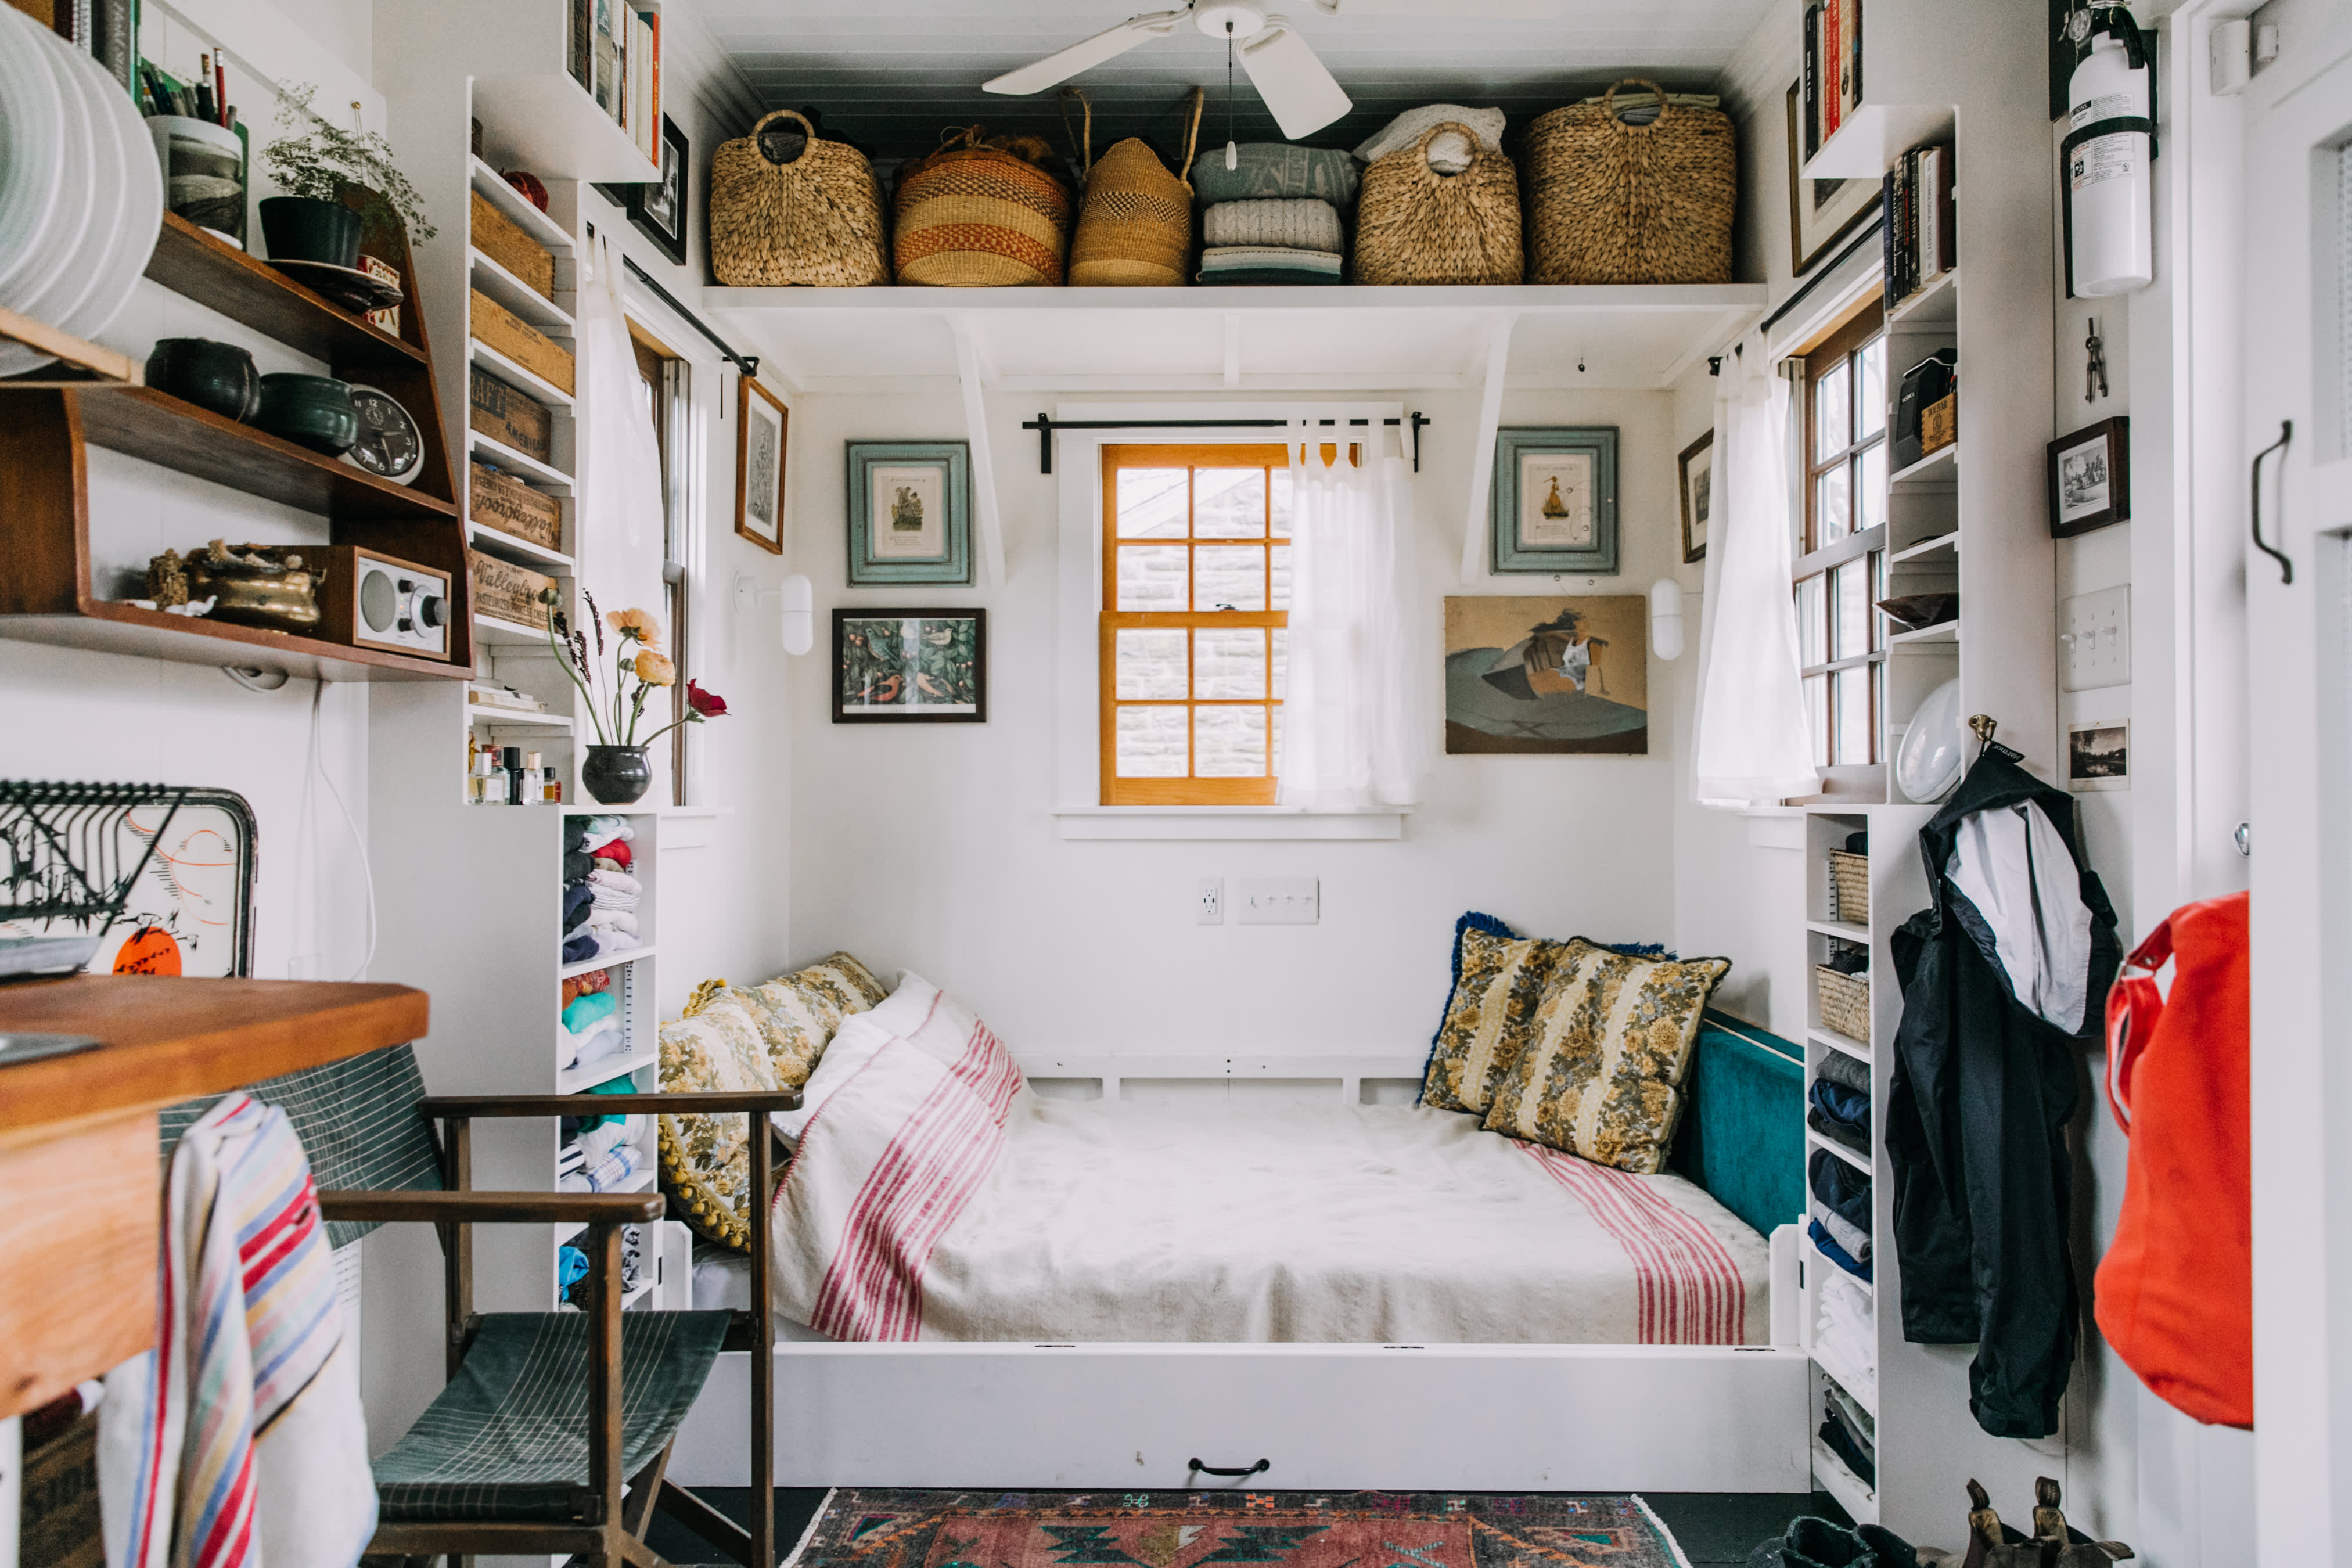 18 Small Bedroom Storage Ideas to Maximize Your Space